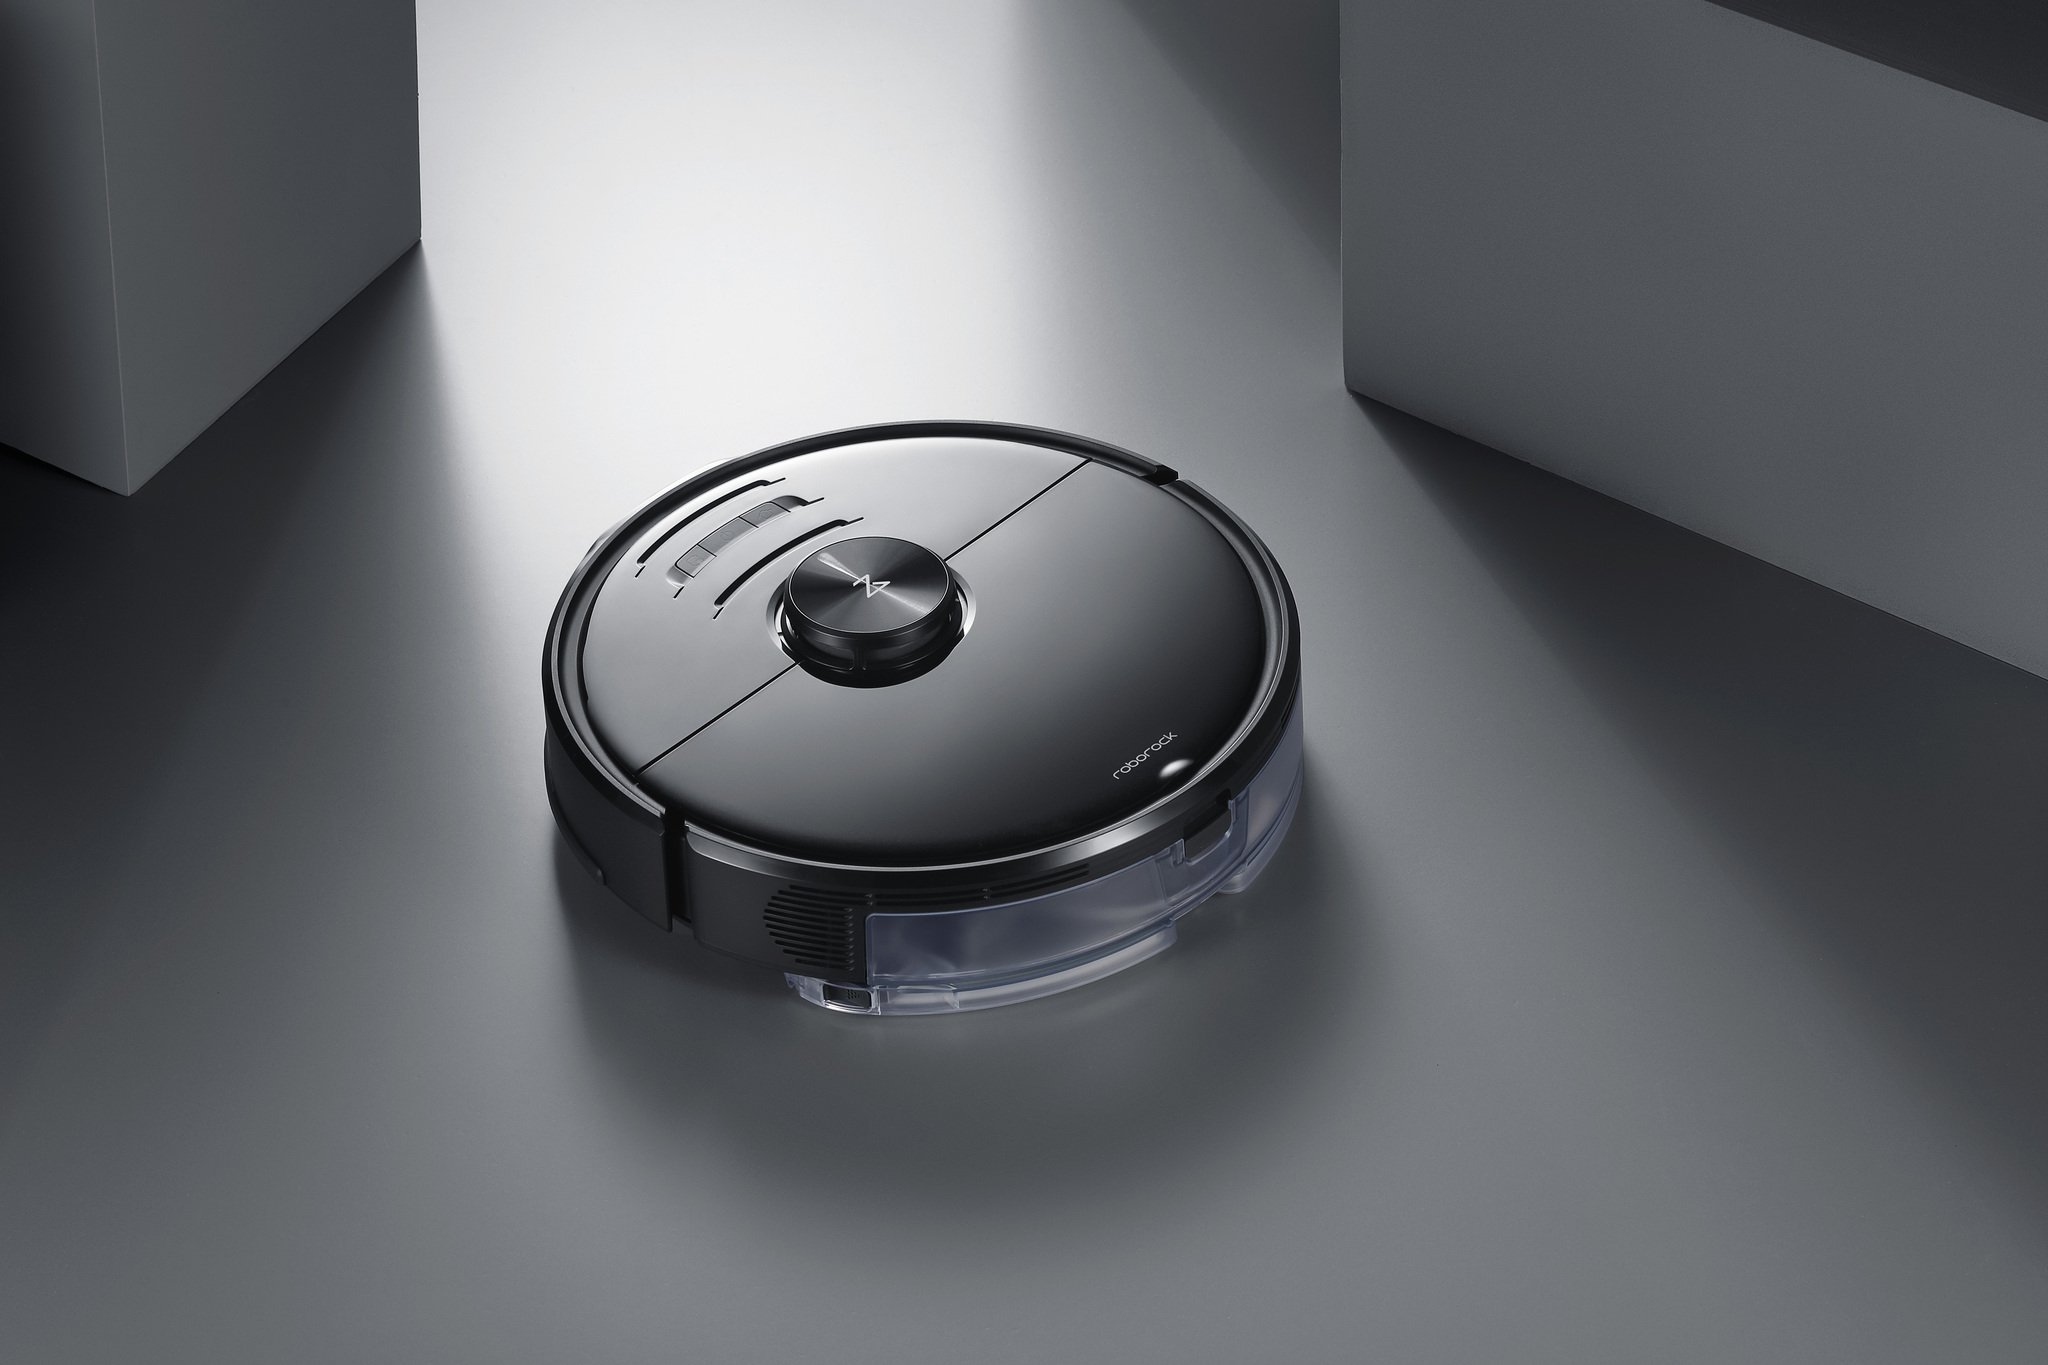 The Roborock S6 MaxV uses two cameras to identify obstacles while vacuuming thumbnail